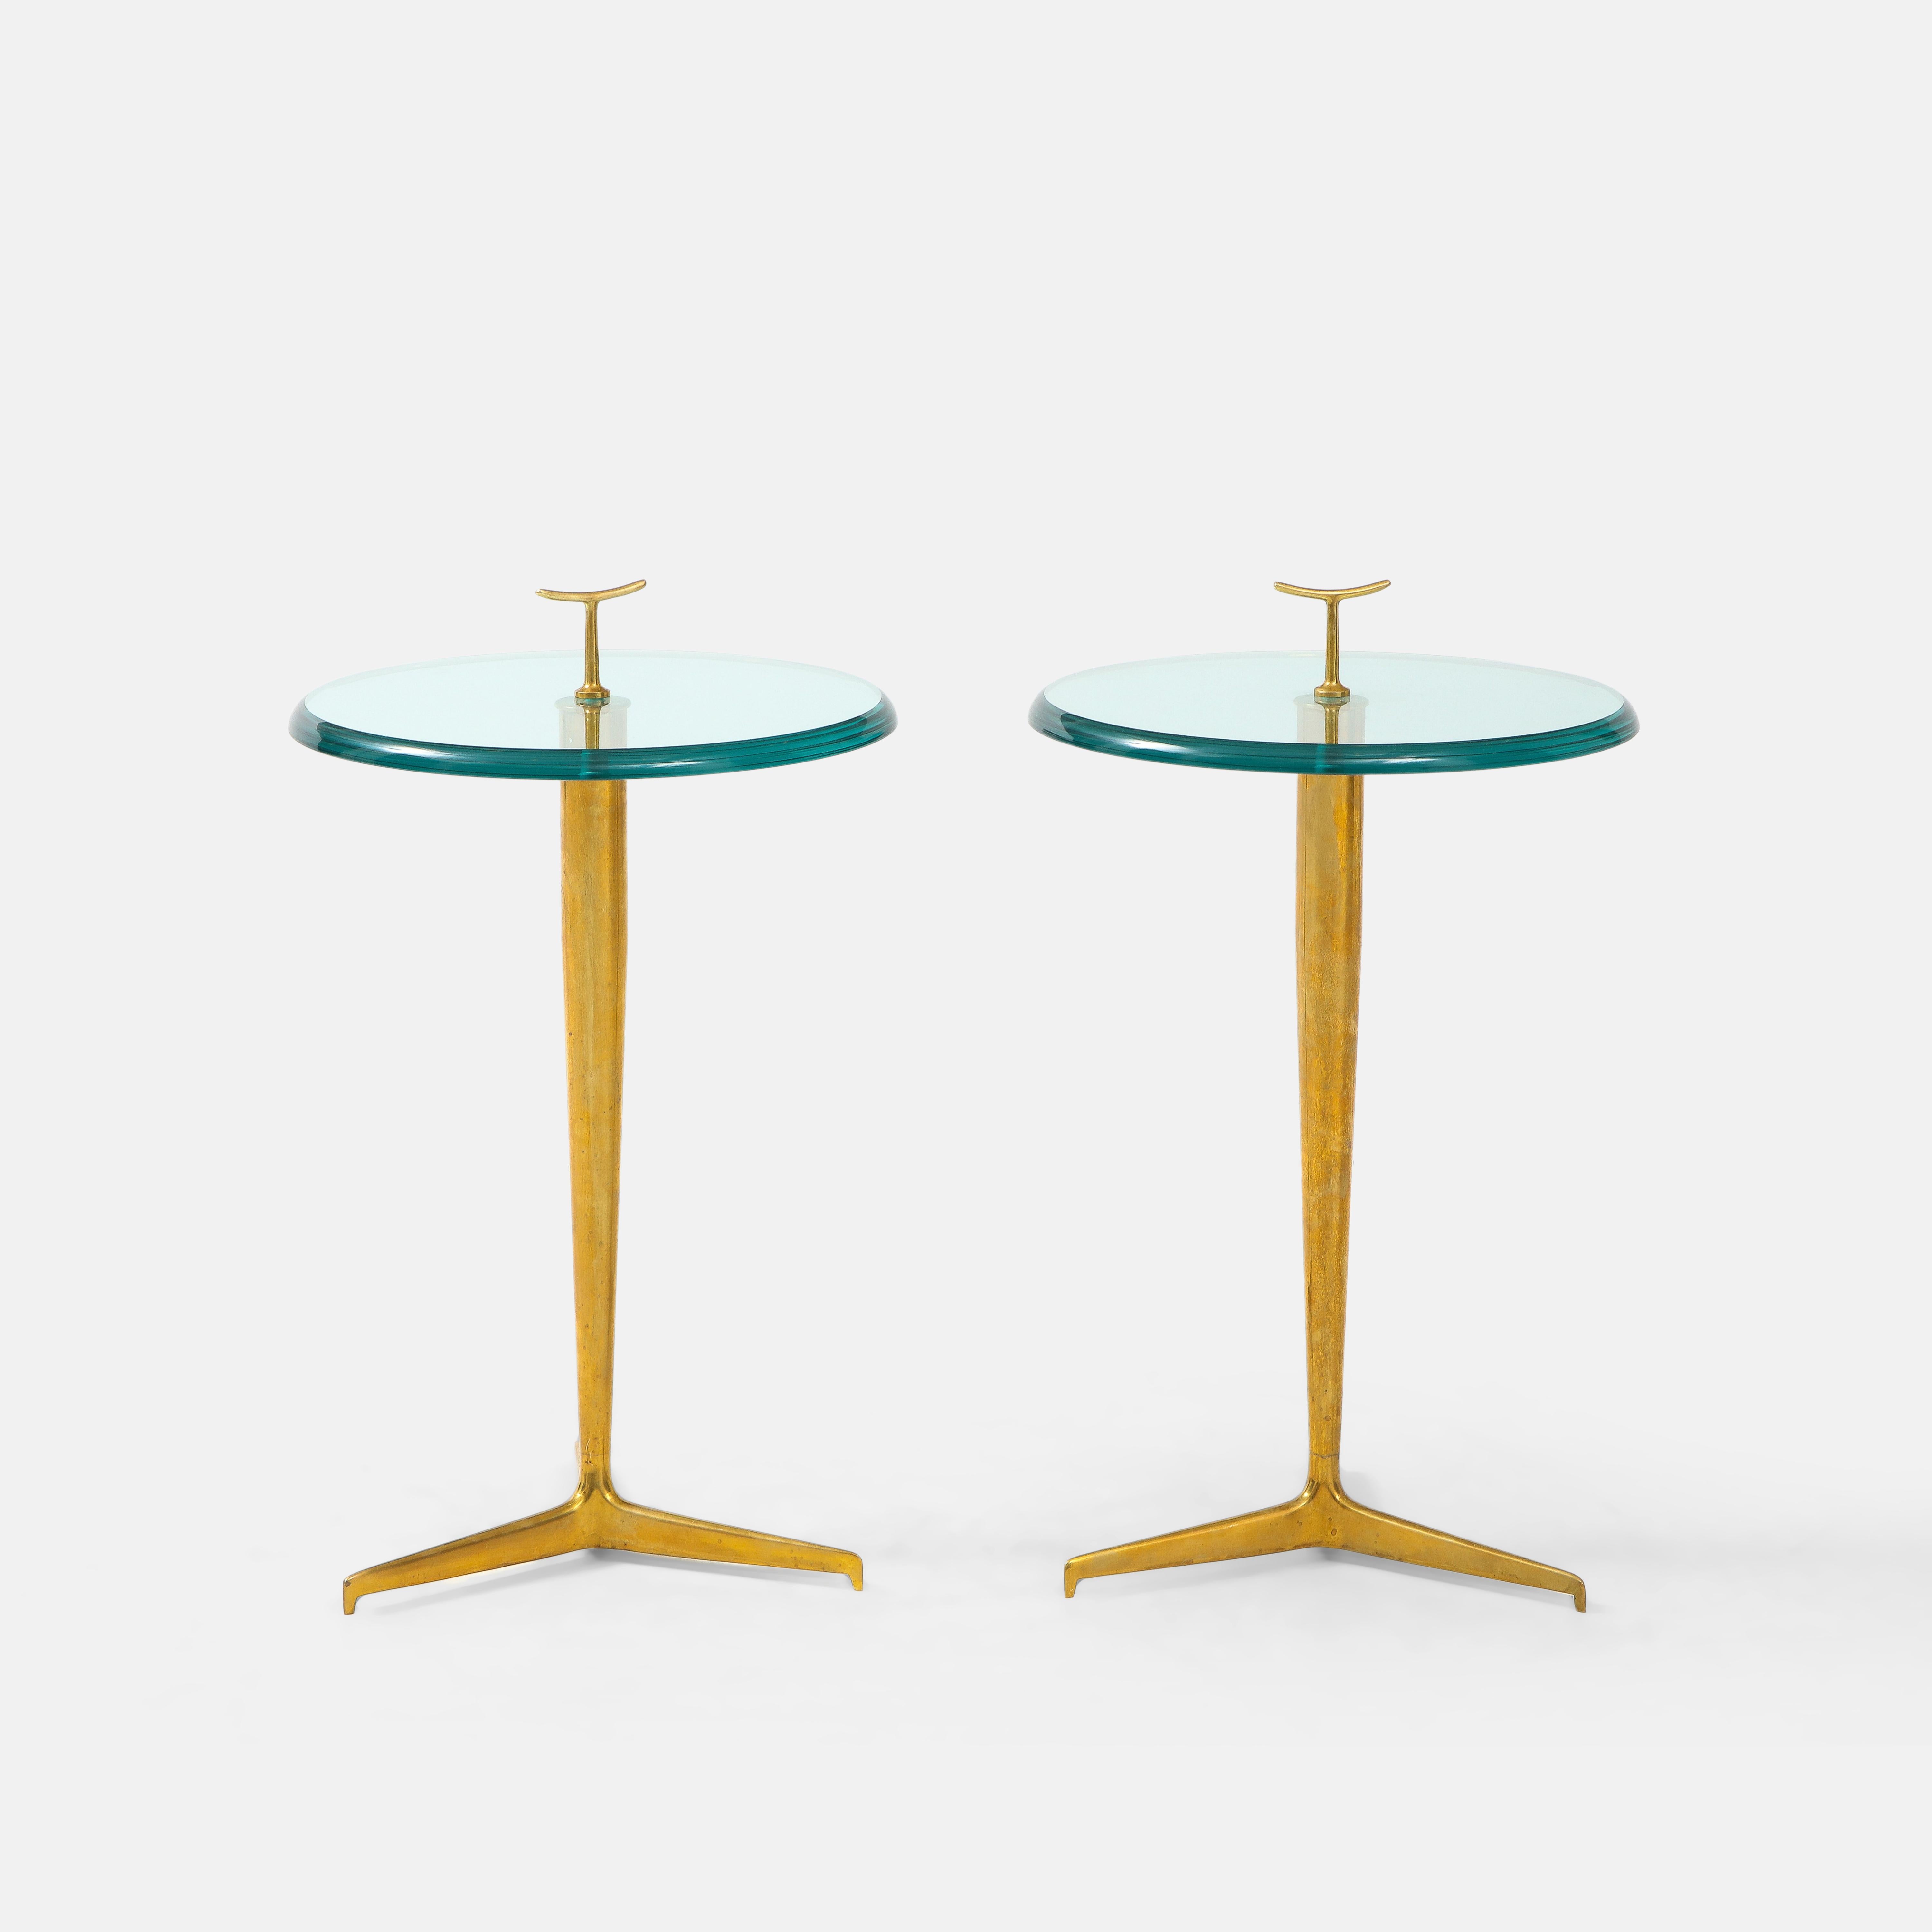 Contemporary custom pair of chic side, end, or drinks tables in thick beveled glass with small brass handle detail on patinated brass tripod base, Italy, 2023. These modernist side tables are beautifully constructed with thick lens cut polished